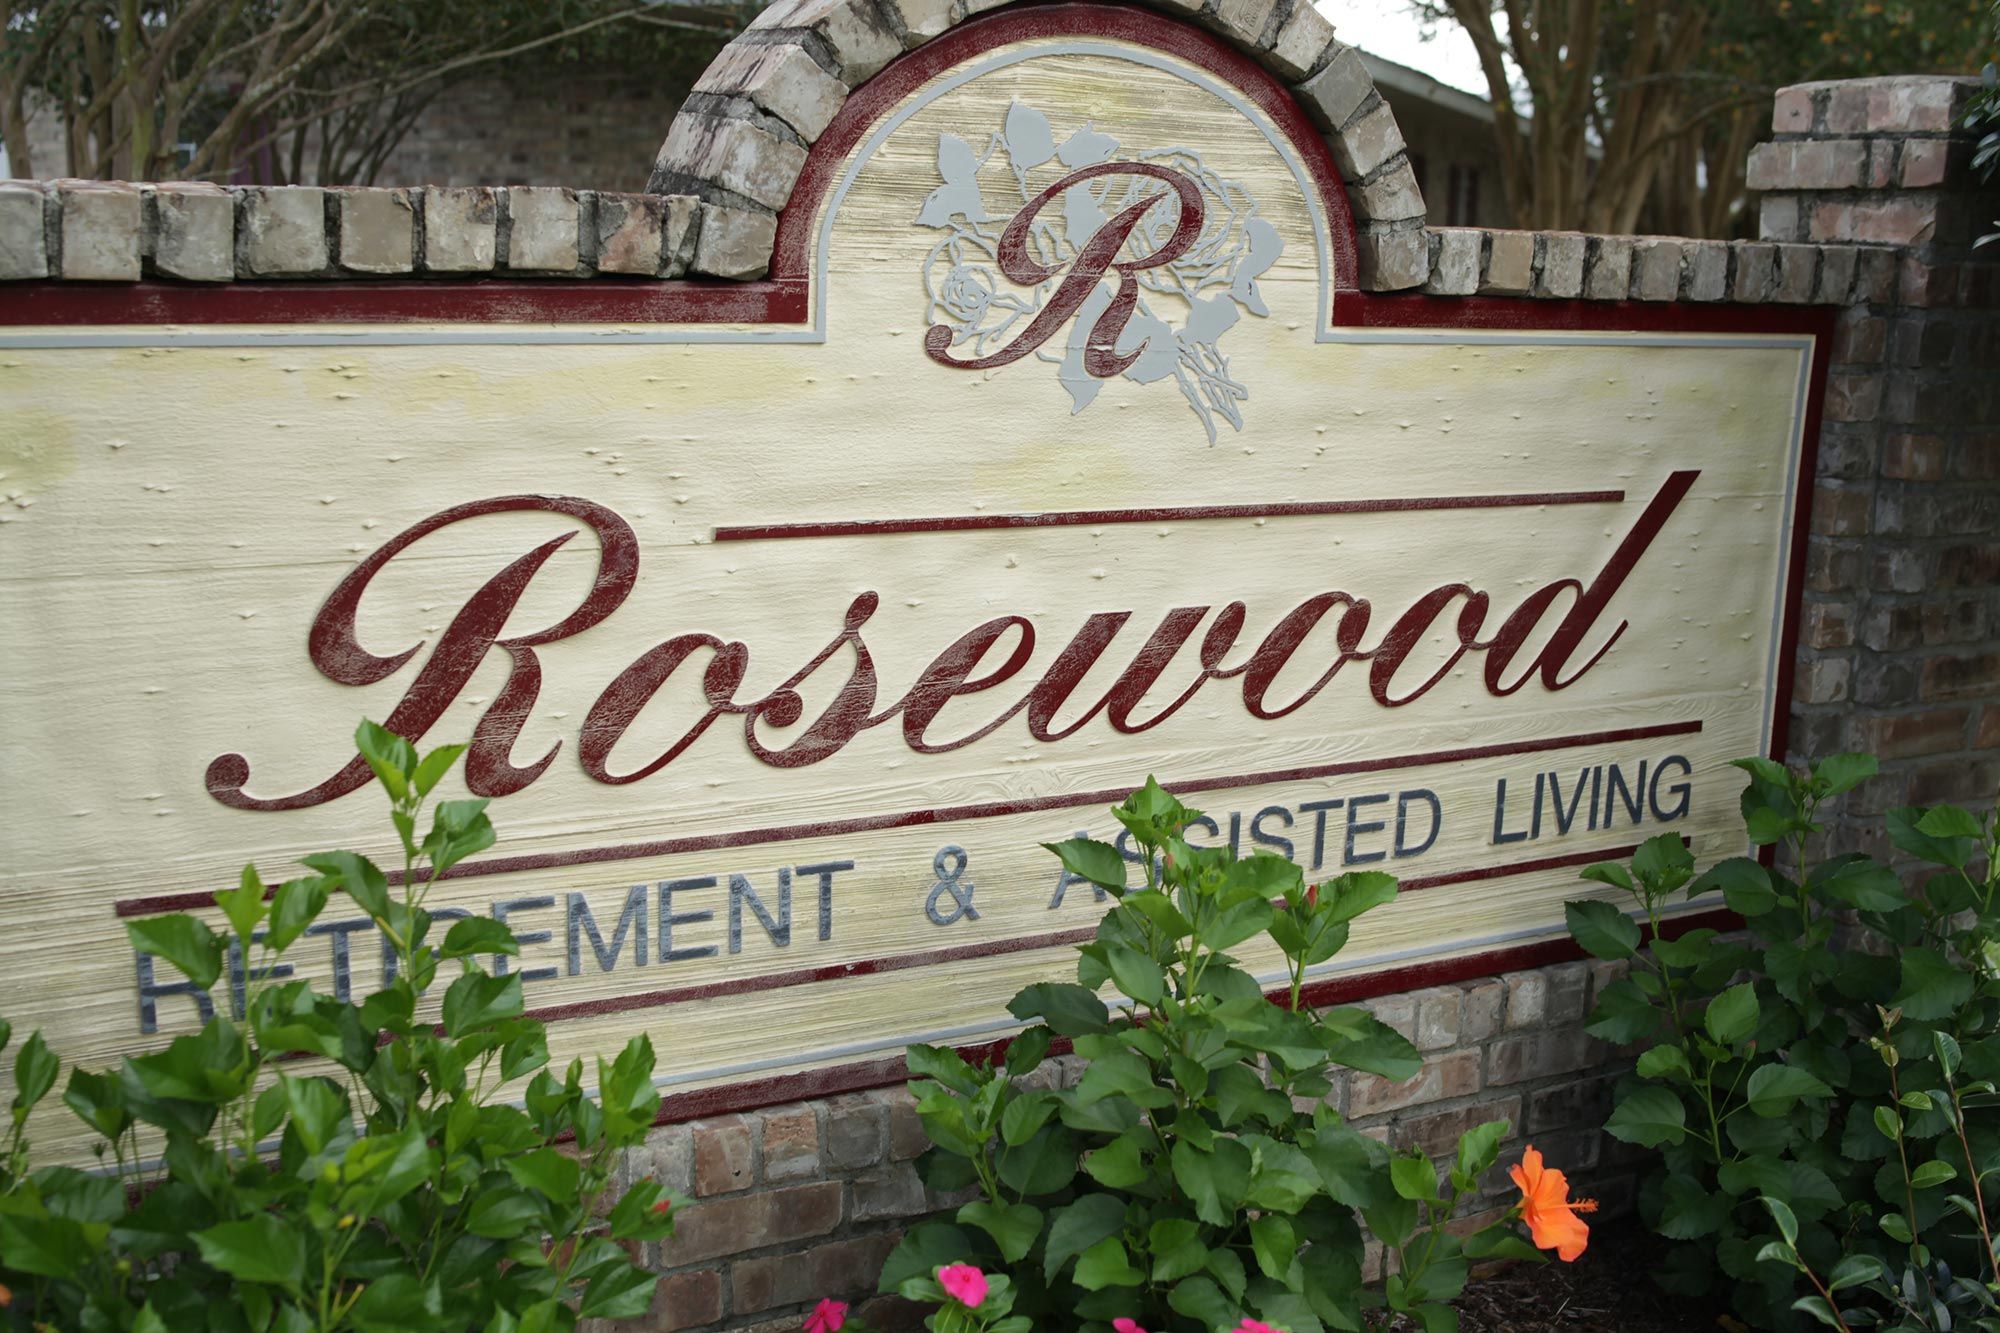 Rosewood Retirement and Assisted Living by Voralto 2